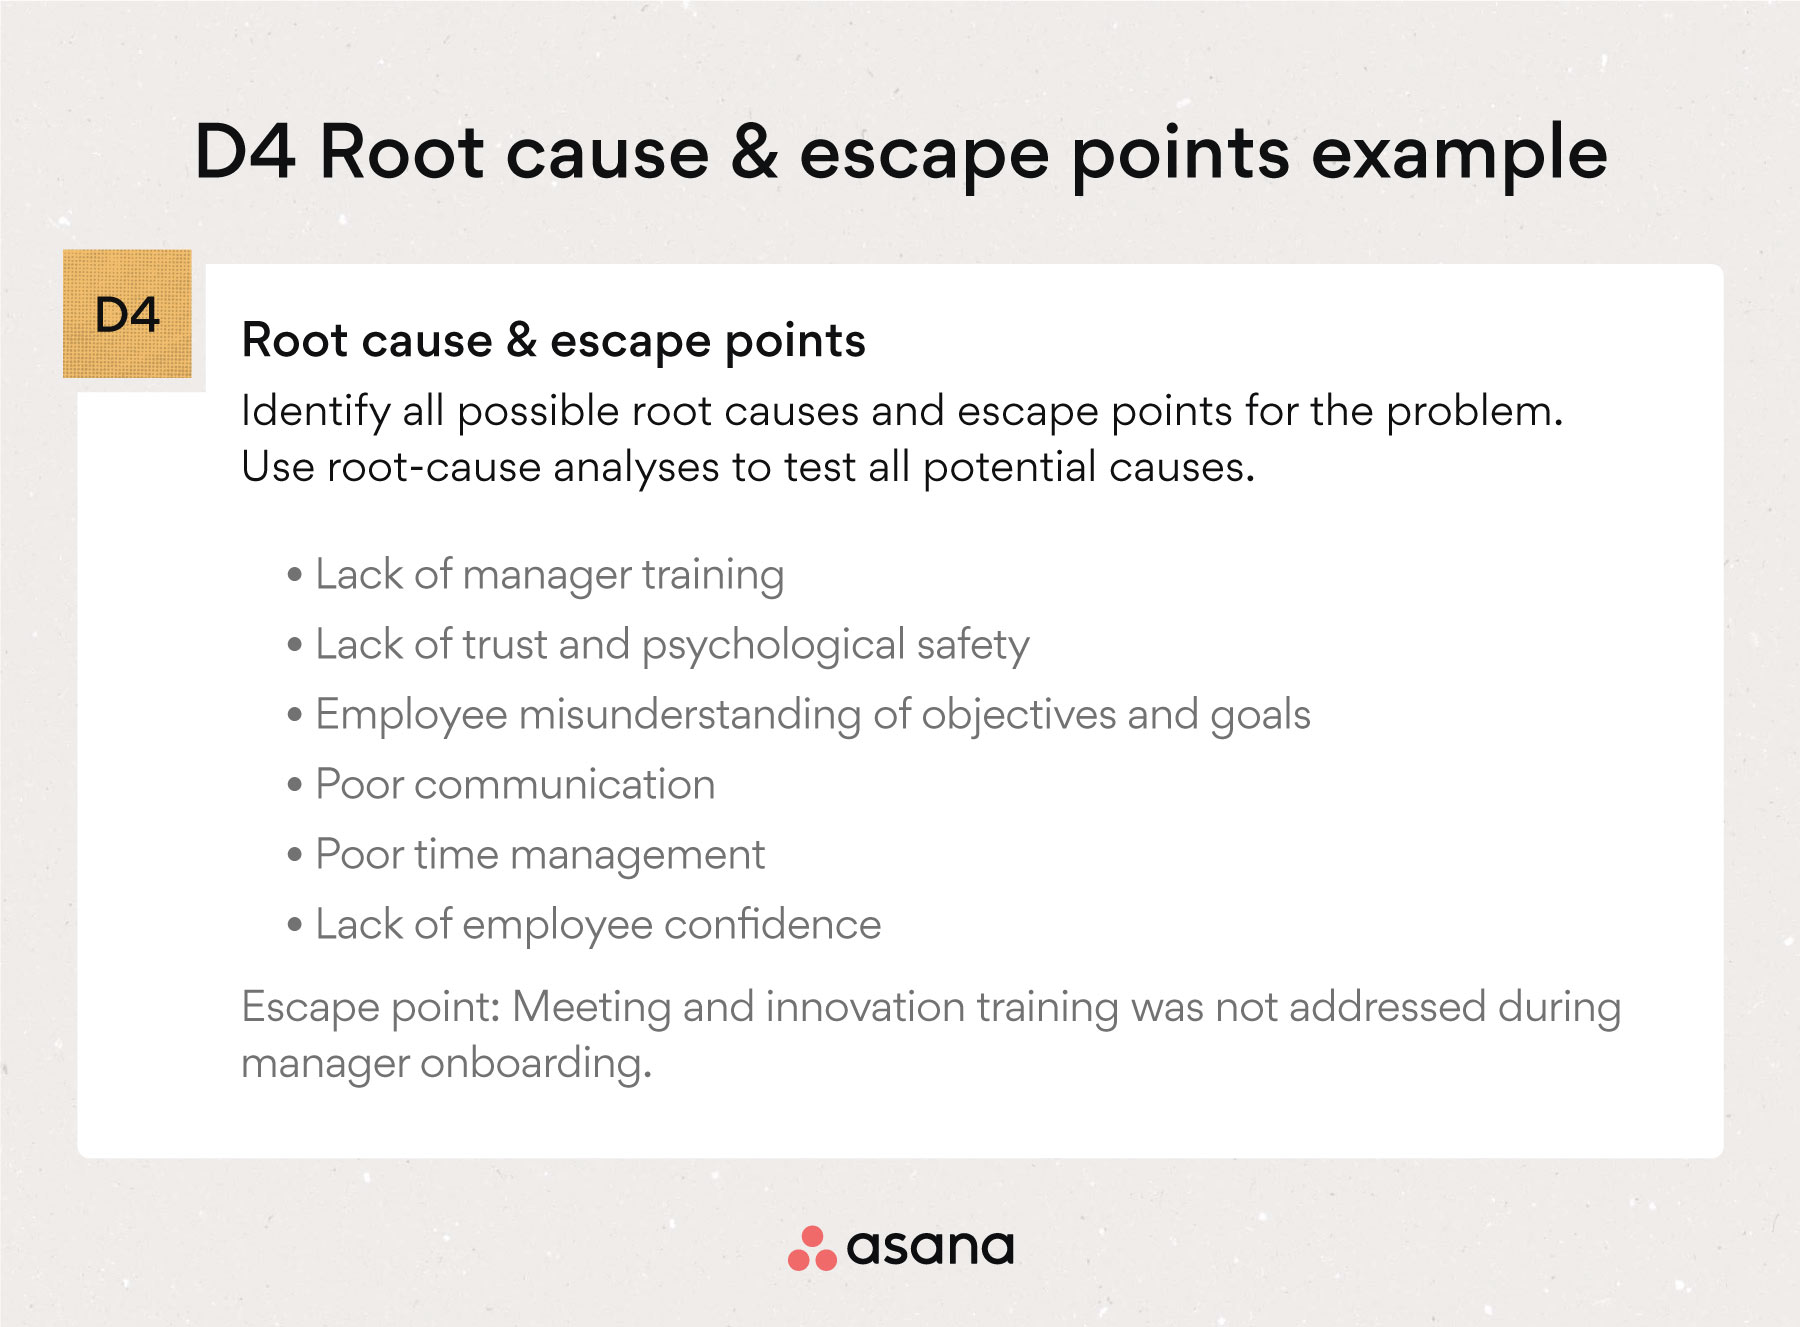 D4 Root cause & escape points example